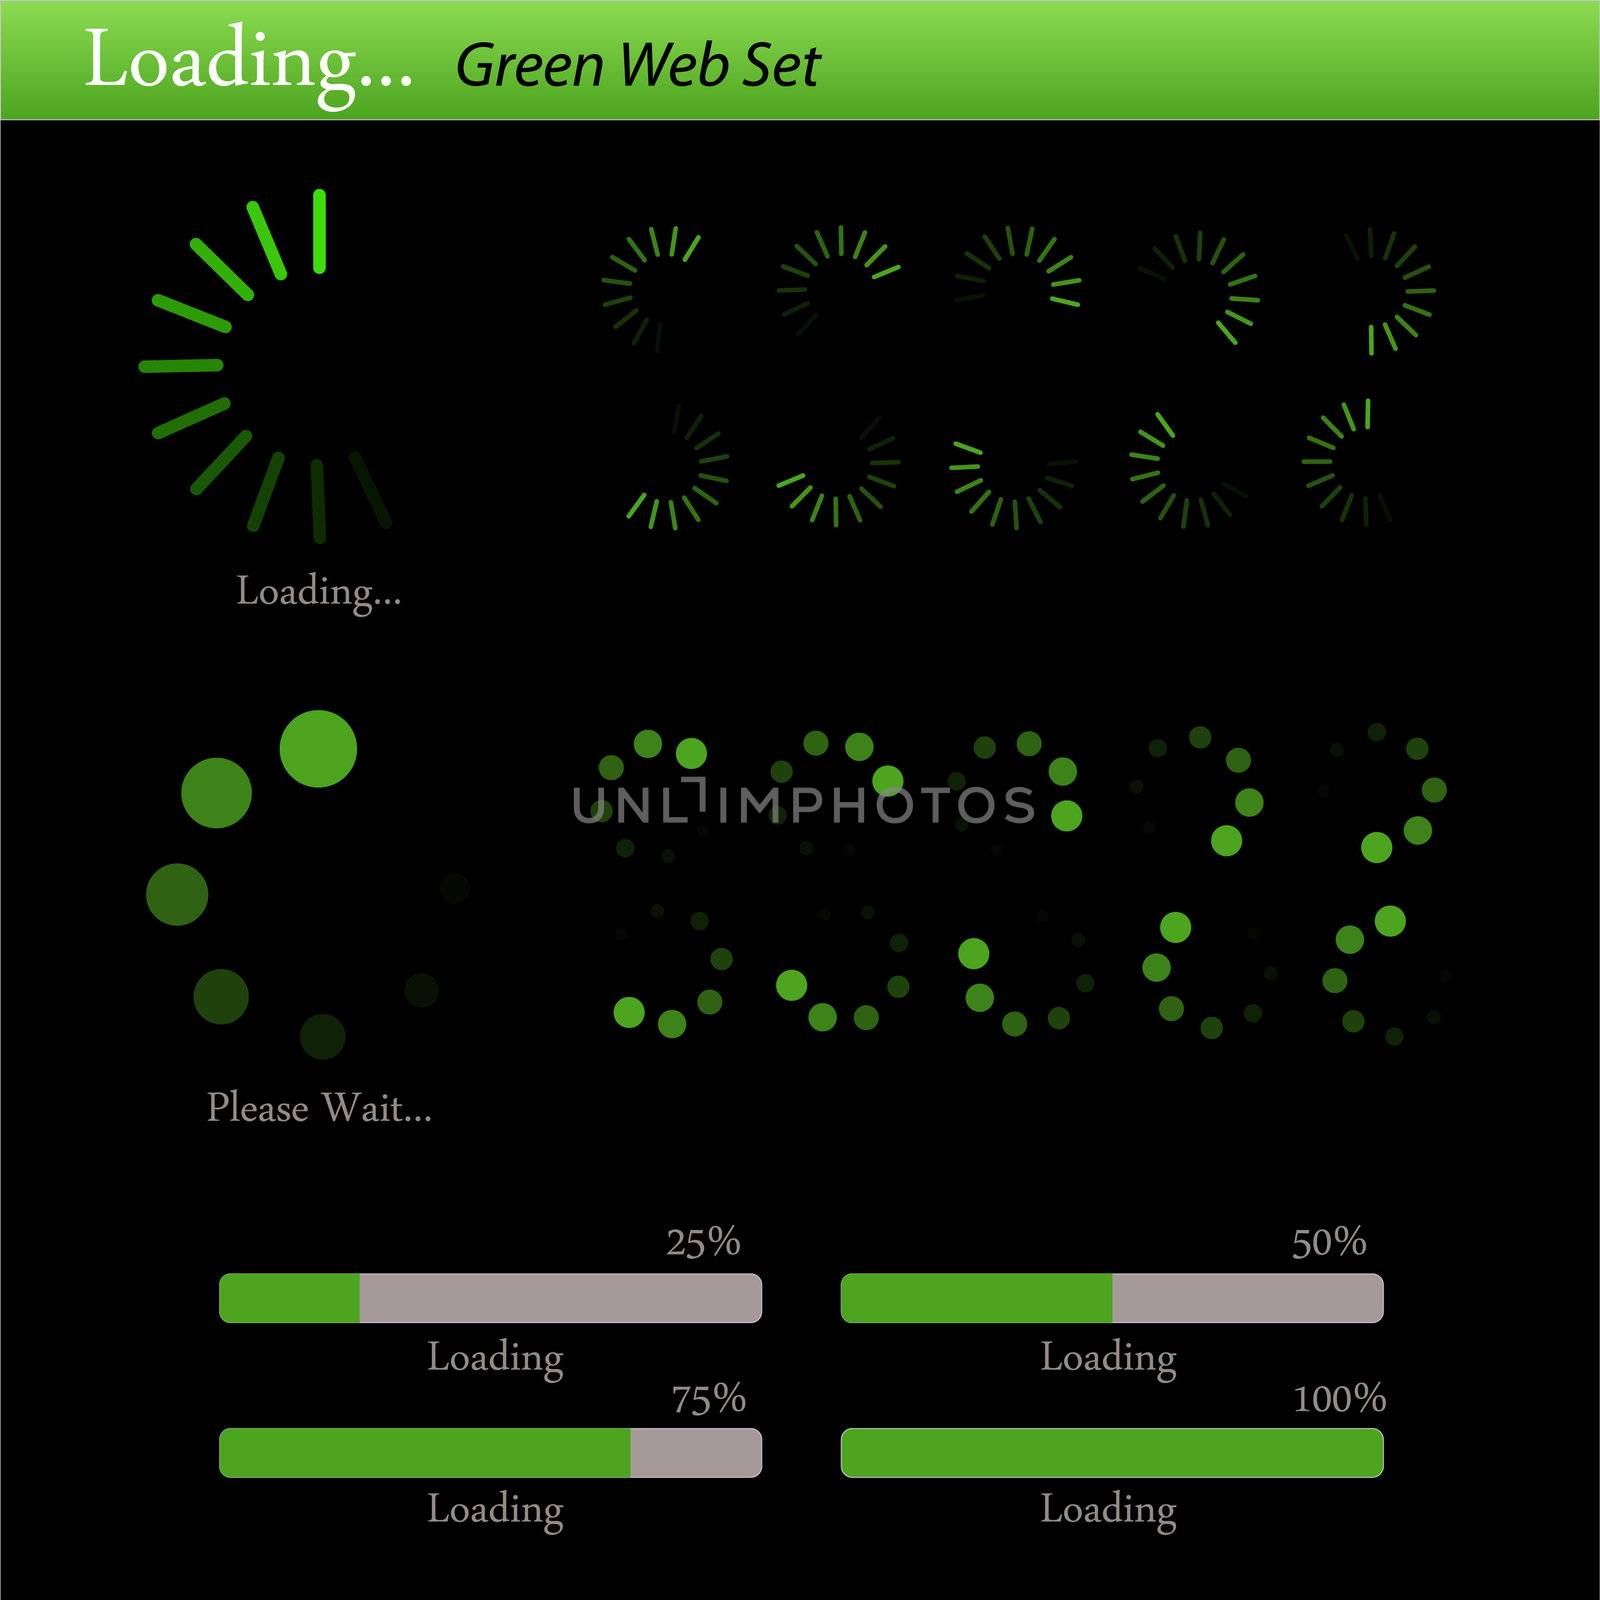 Image of a colorful, green loading web set on a black background.